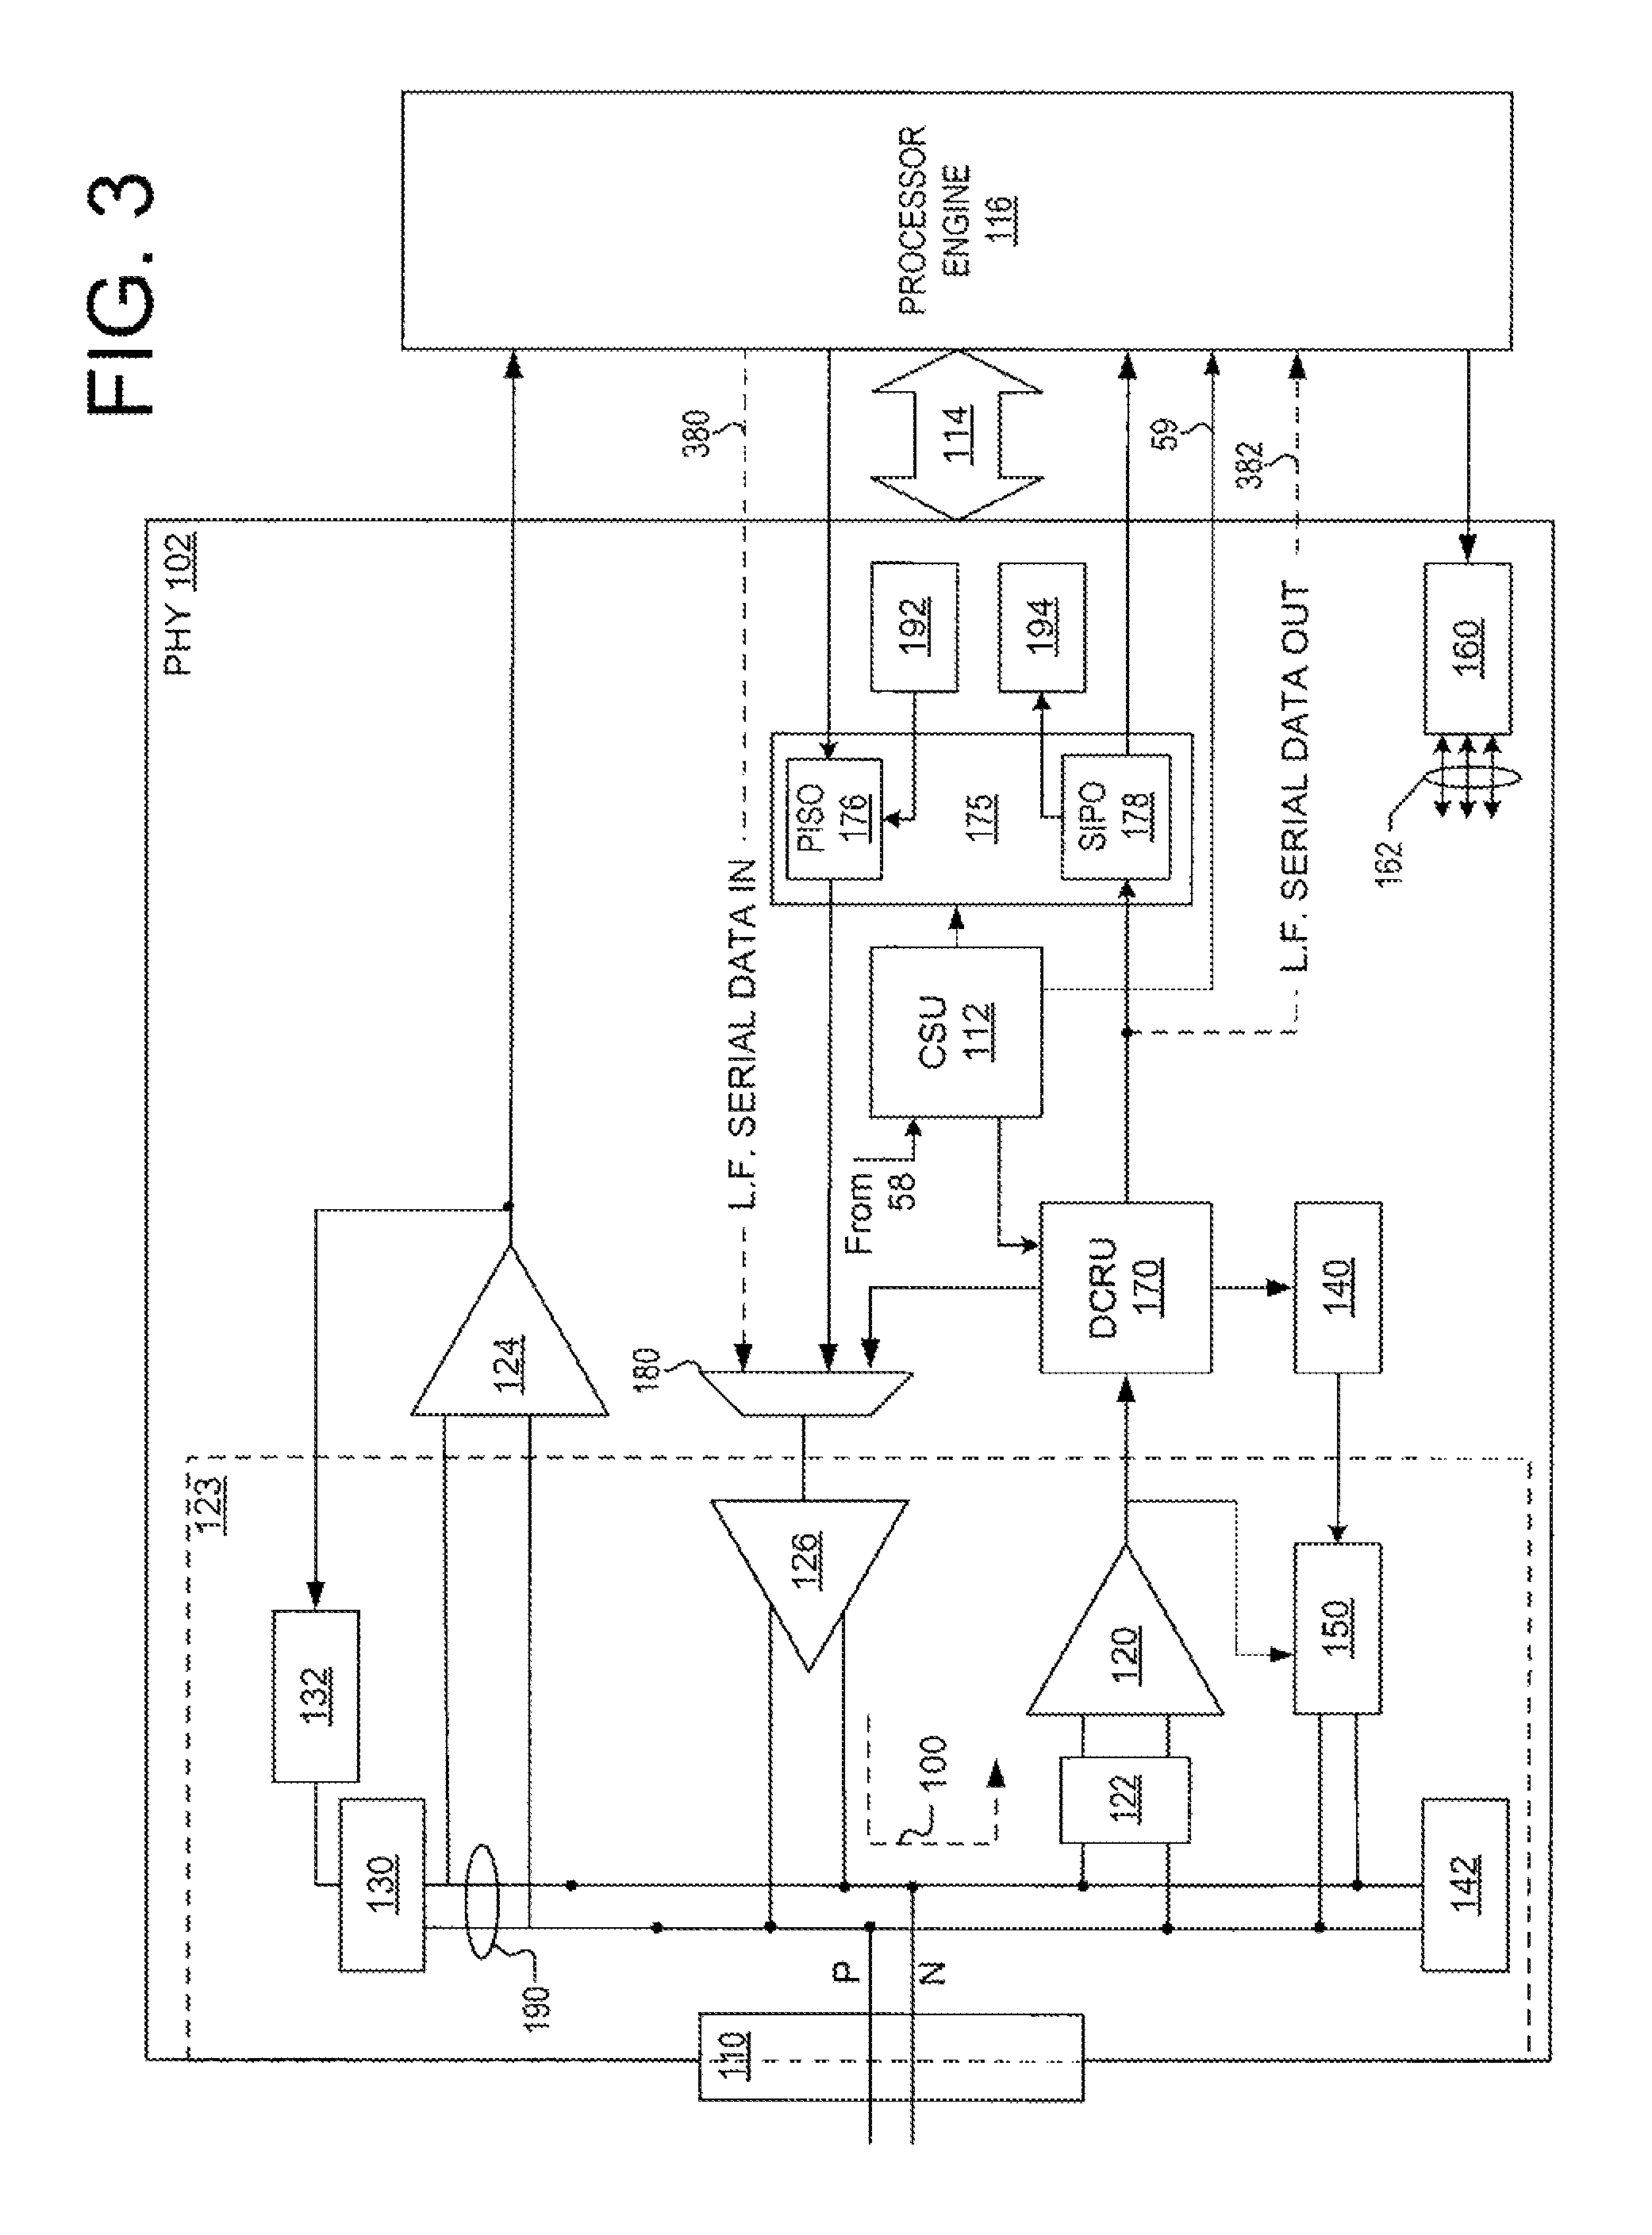 Differential serial interface for supporting a plurality of differential serial interface standards